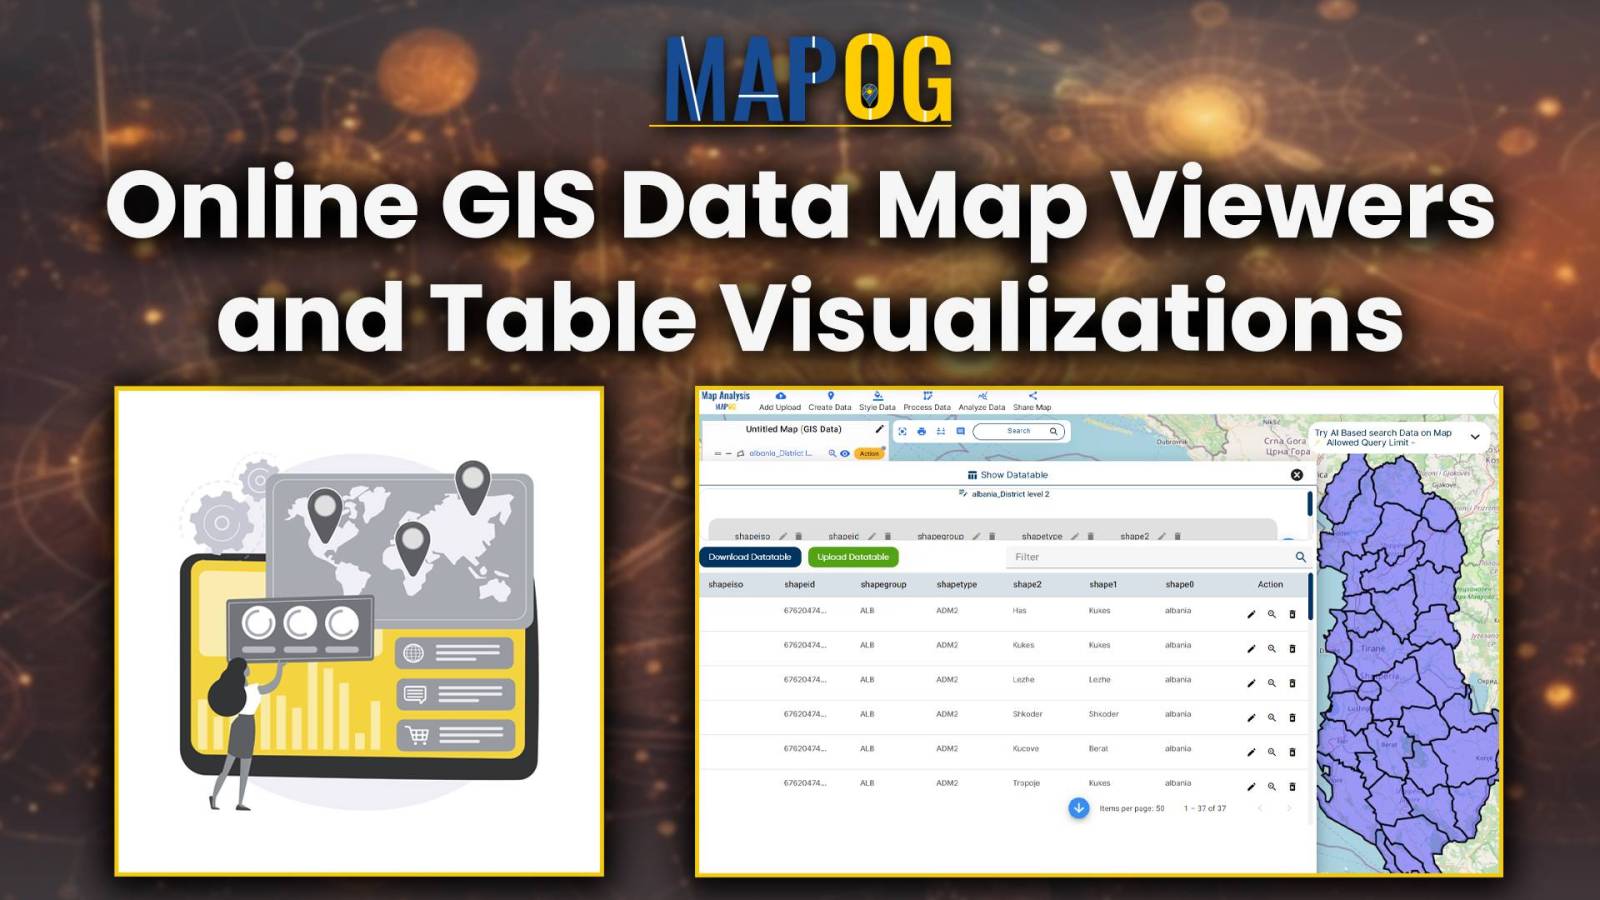 Online GIS Data Map Viewers and Table Visualizations